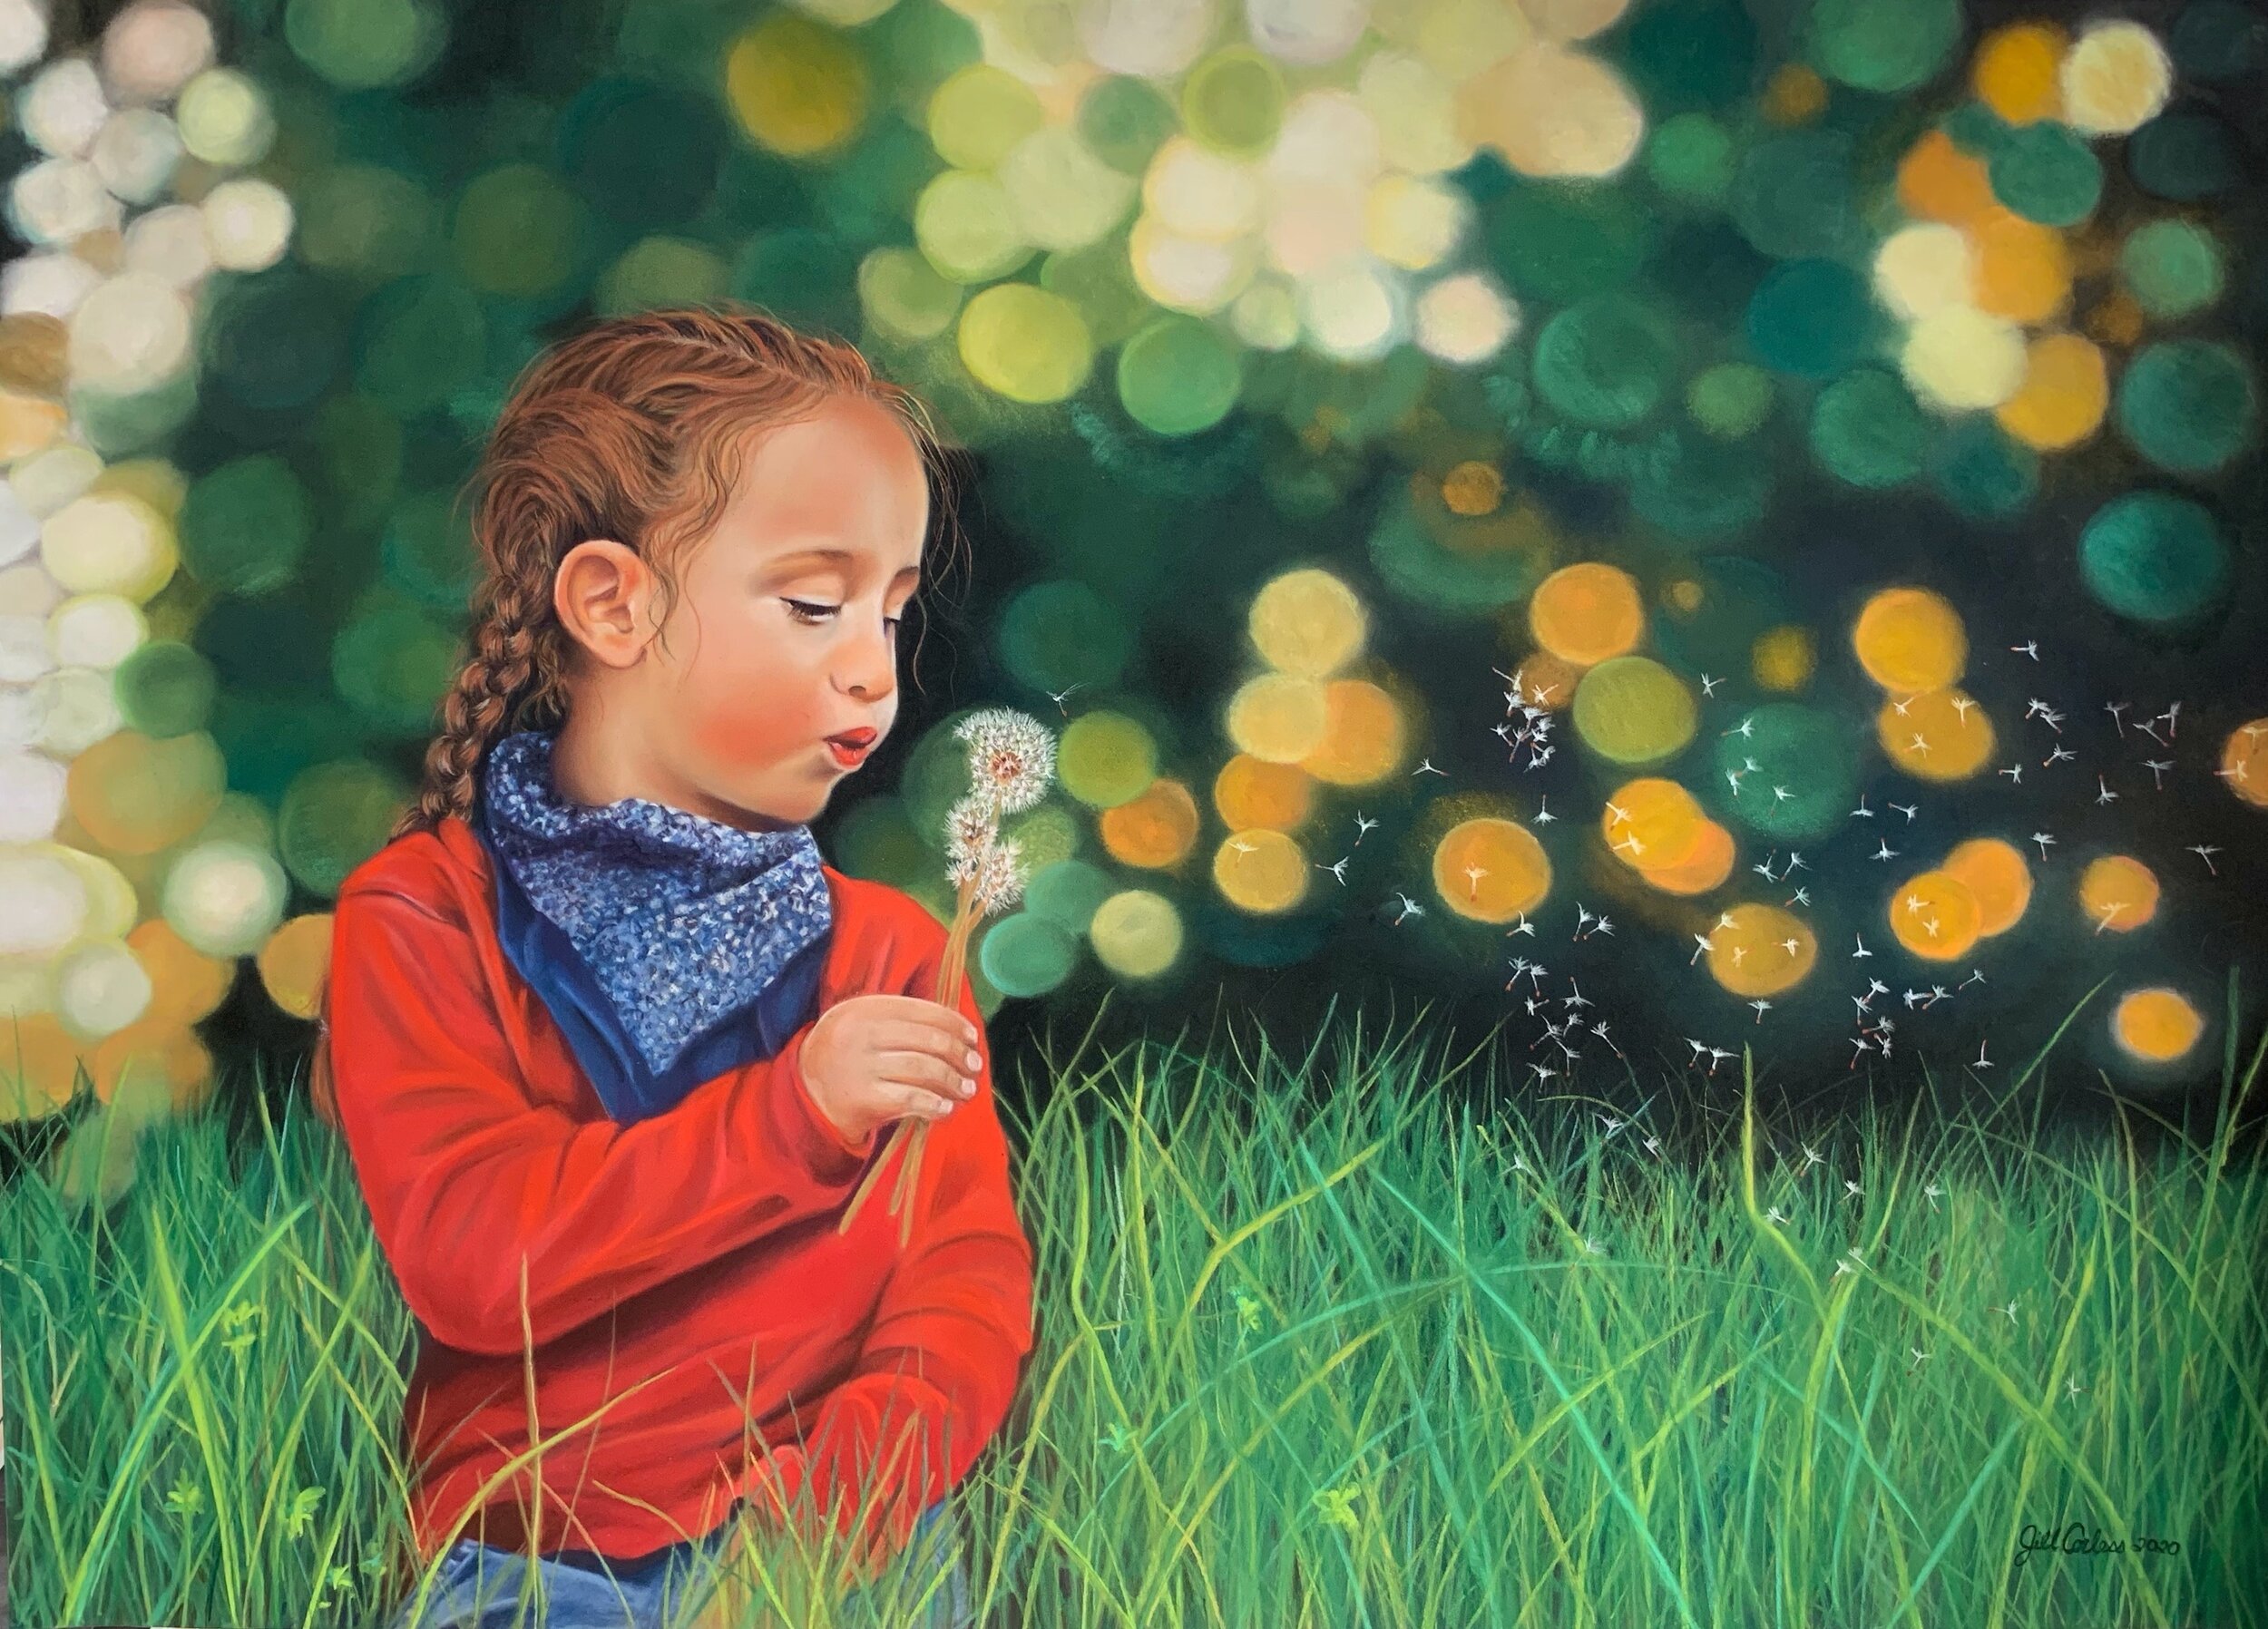 Dandelion wishes, fairytale dreams 20x28” pastel please contact me with any inquiries 